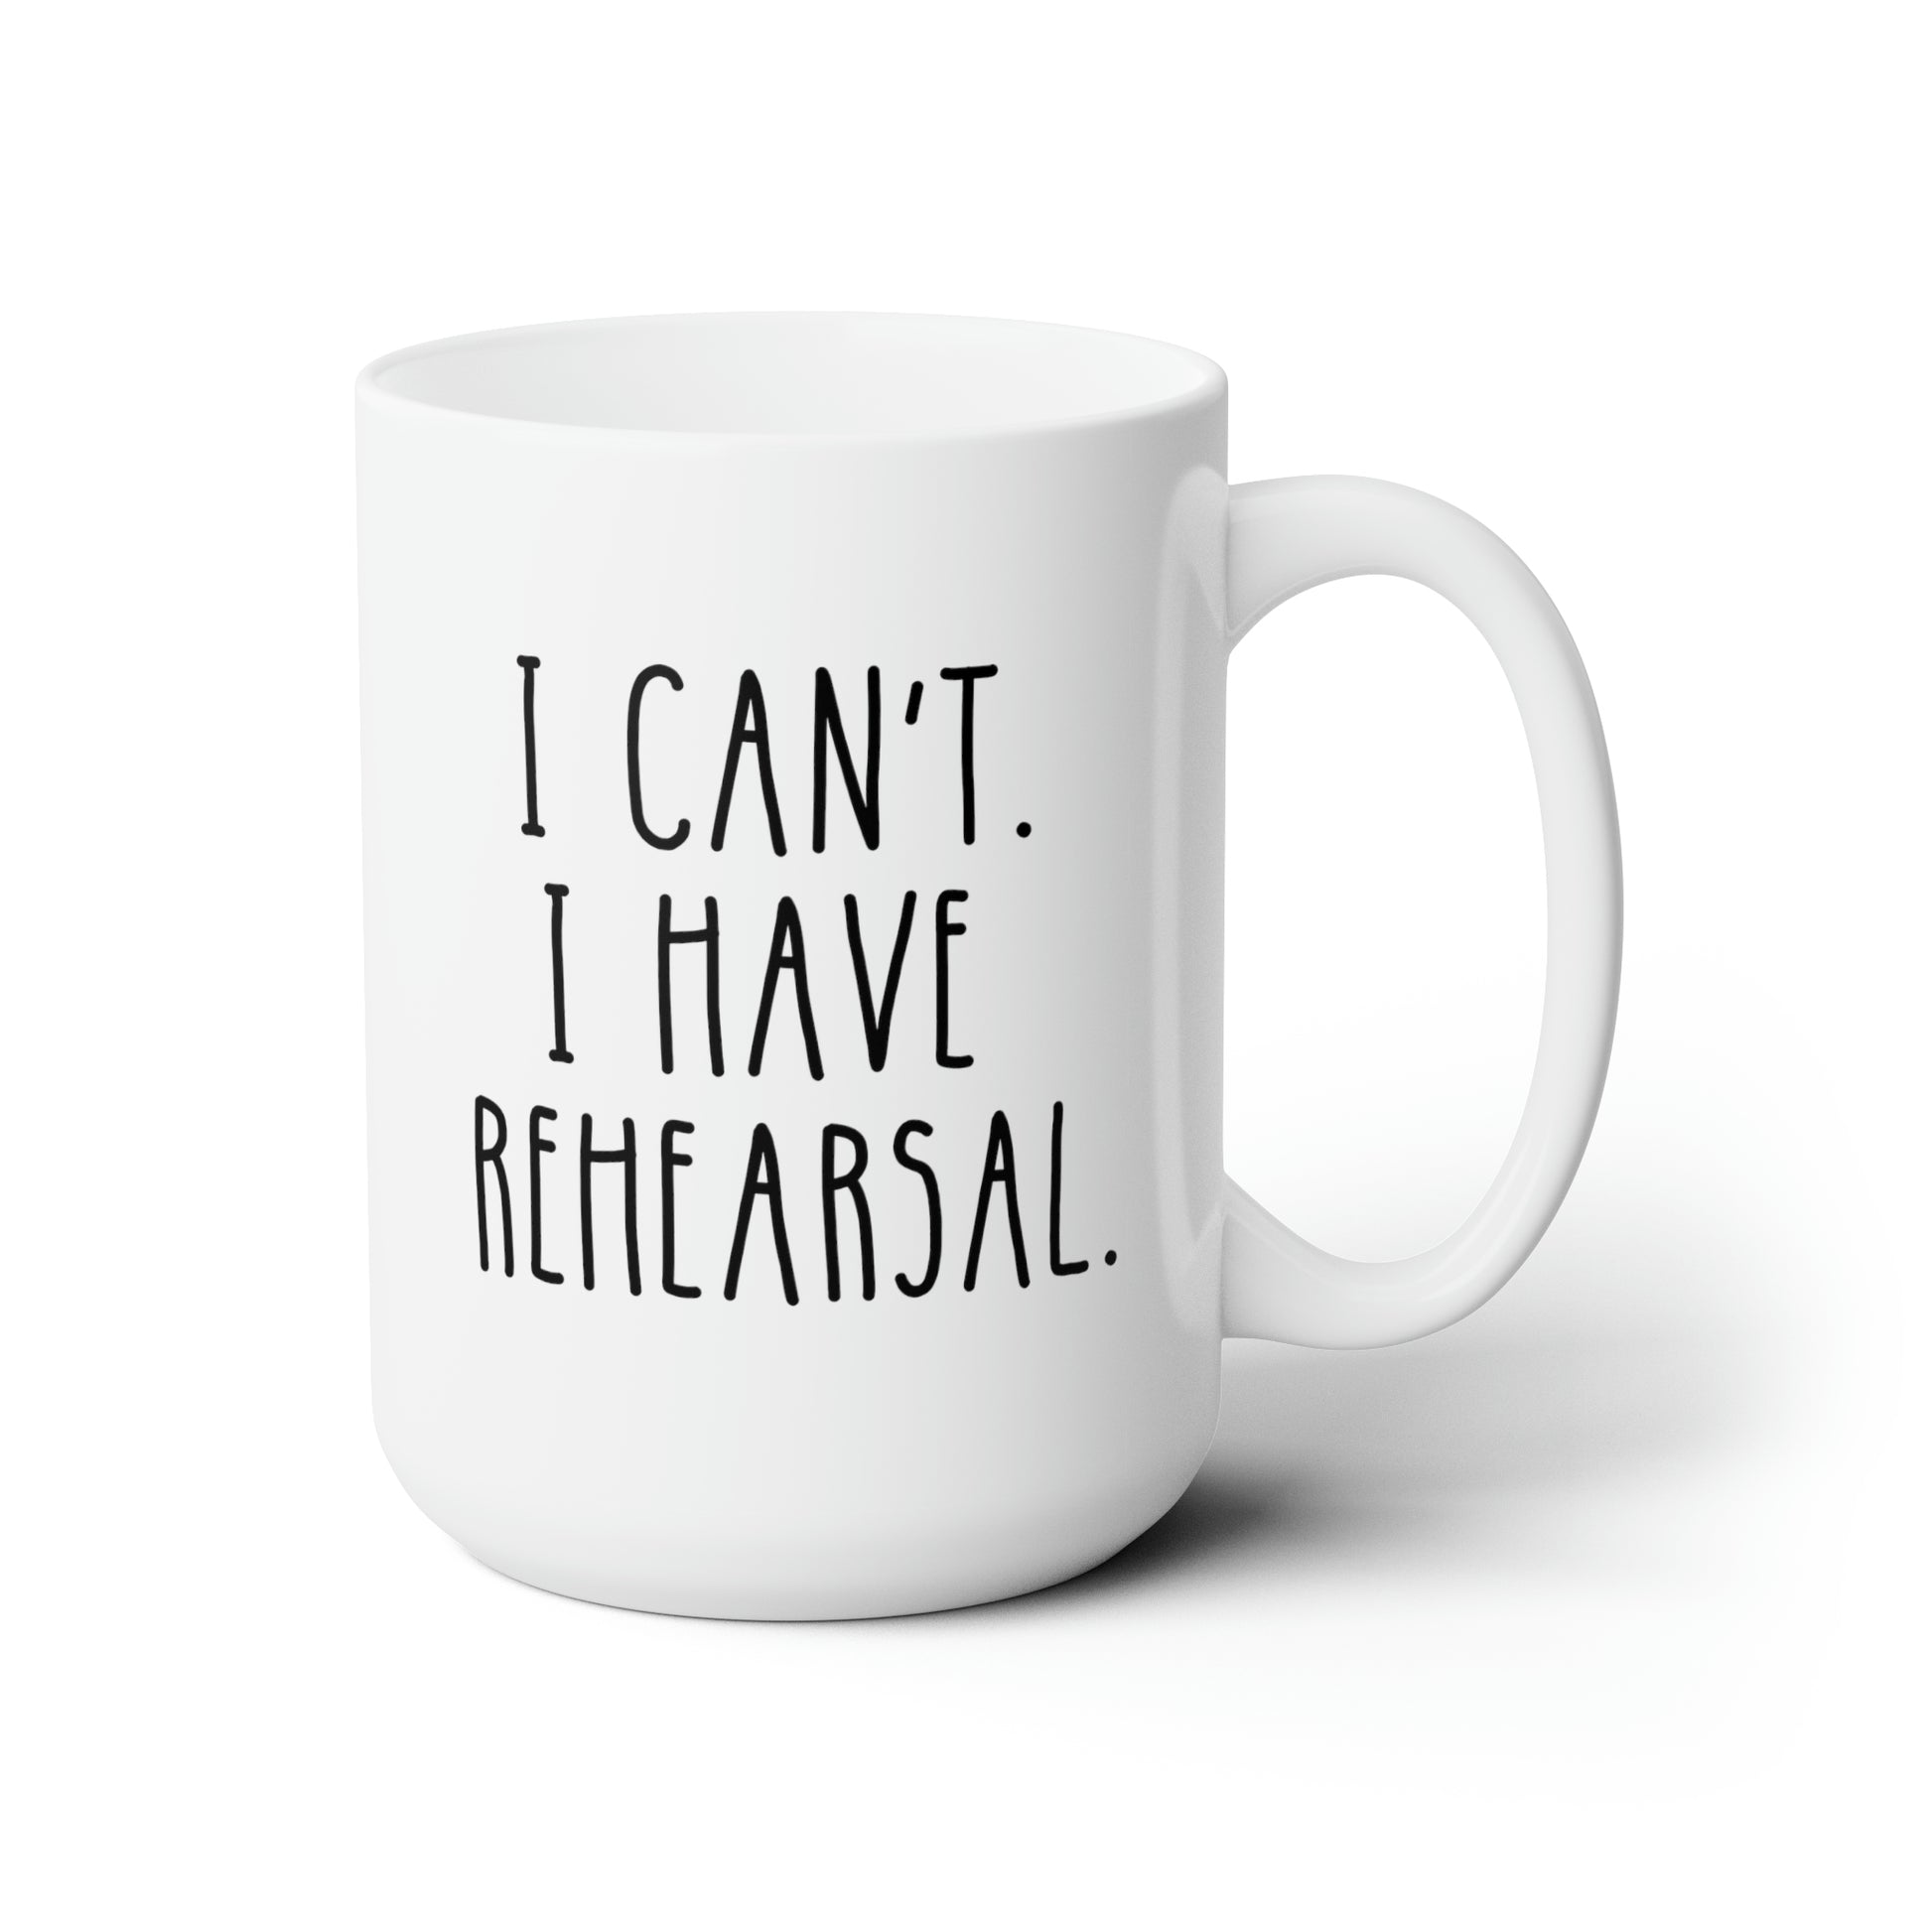 I Can't. I Have Rehearsal. 15oz white funny large coffee mug gift for theater actor actress dancer band singer waveywares wavey wares wavywares wavy wares